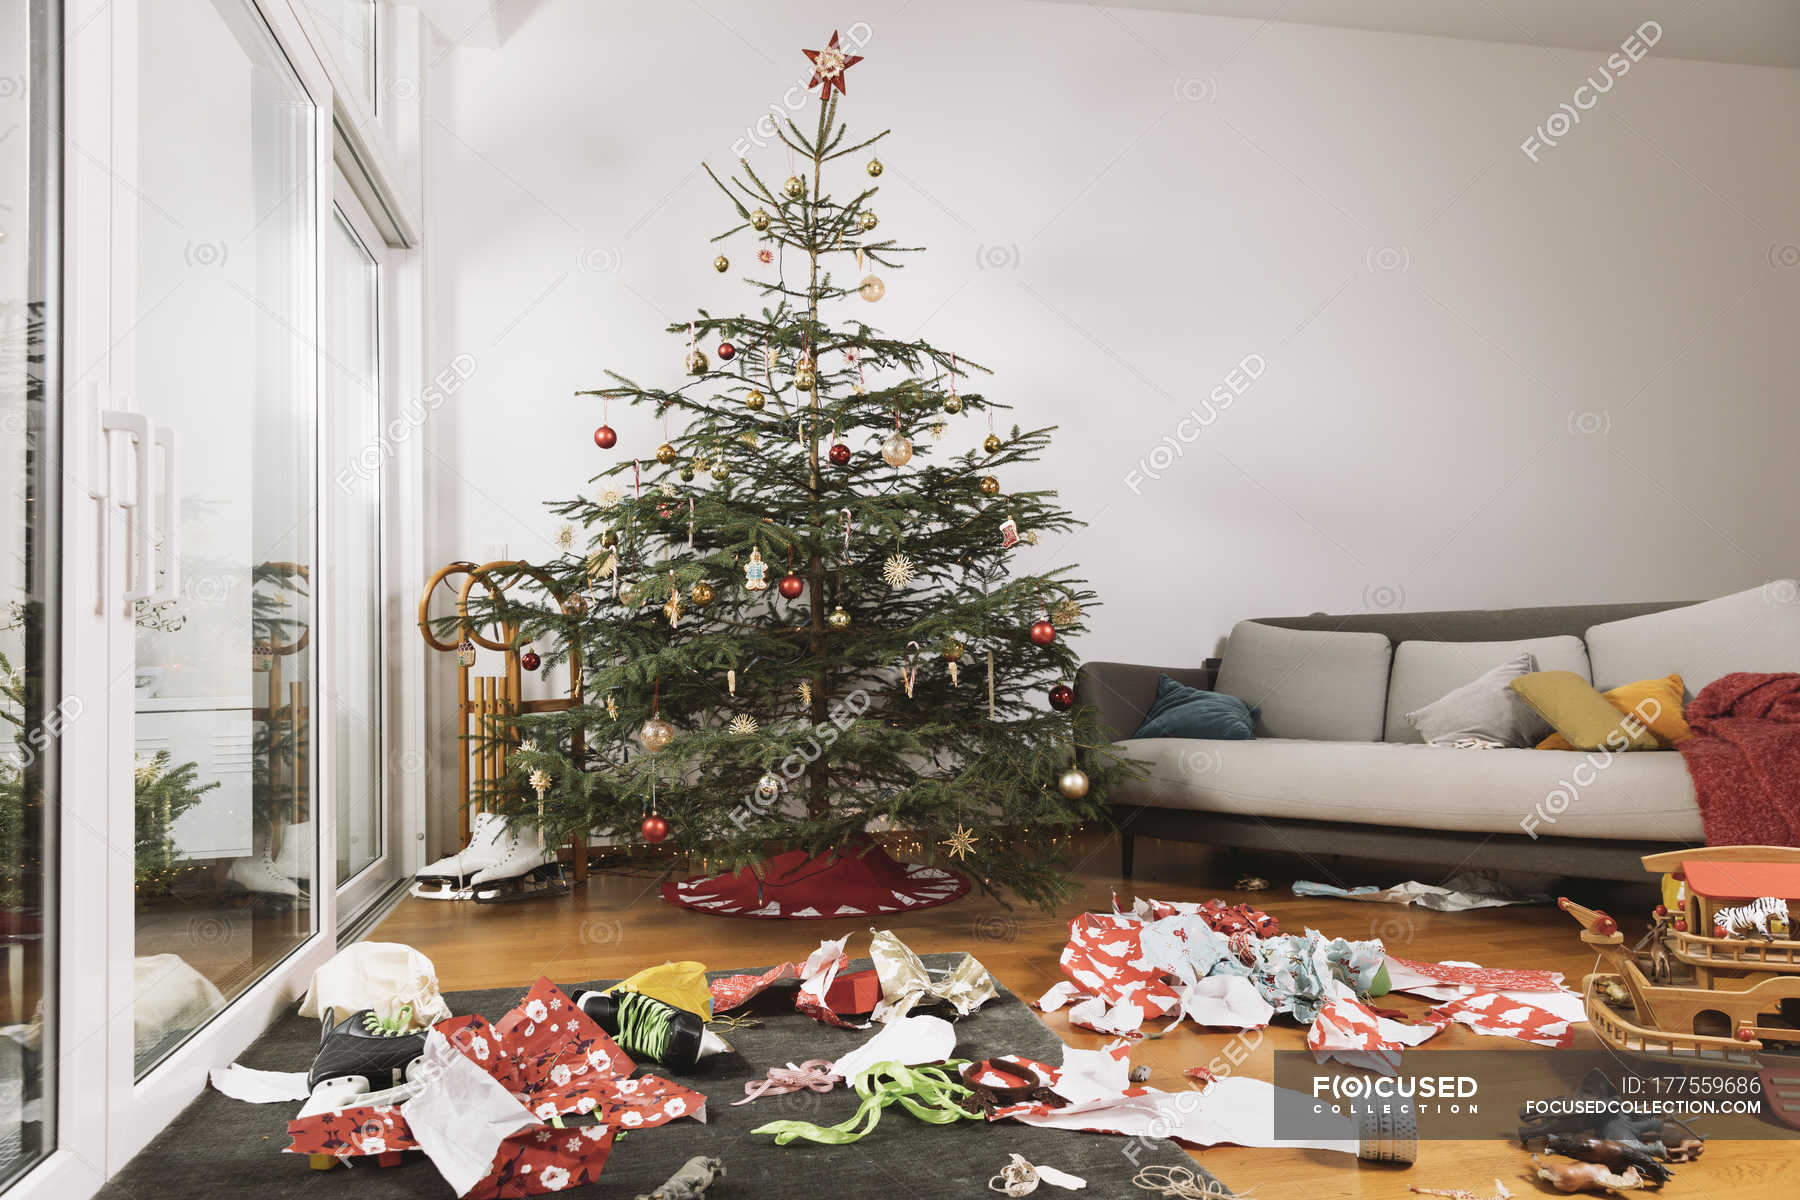 Christmas Mess In The Living Room